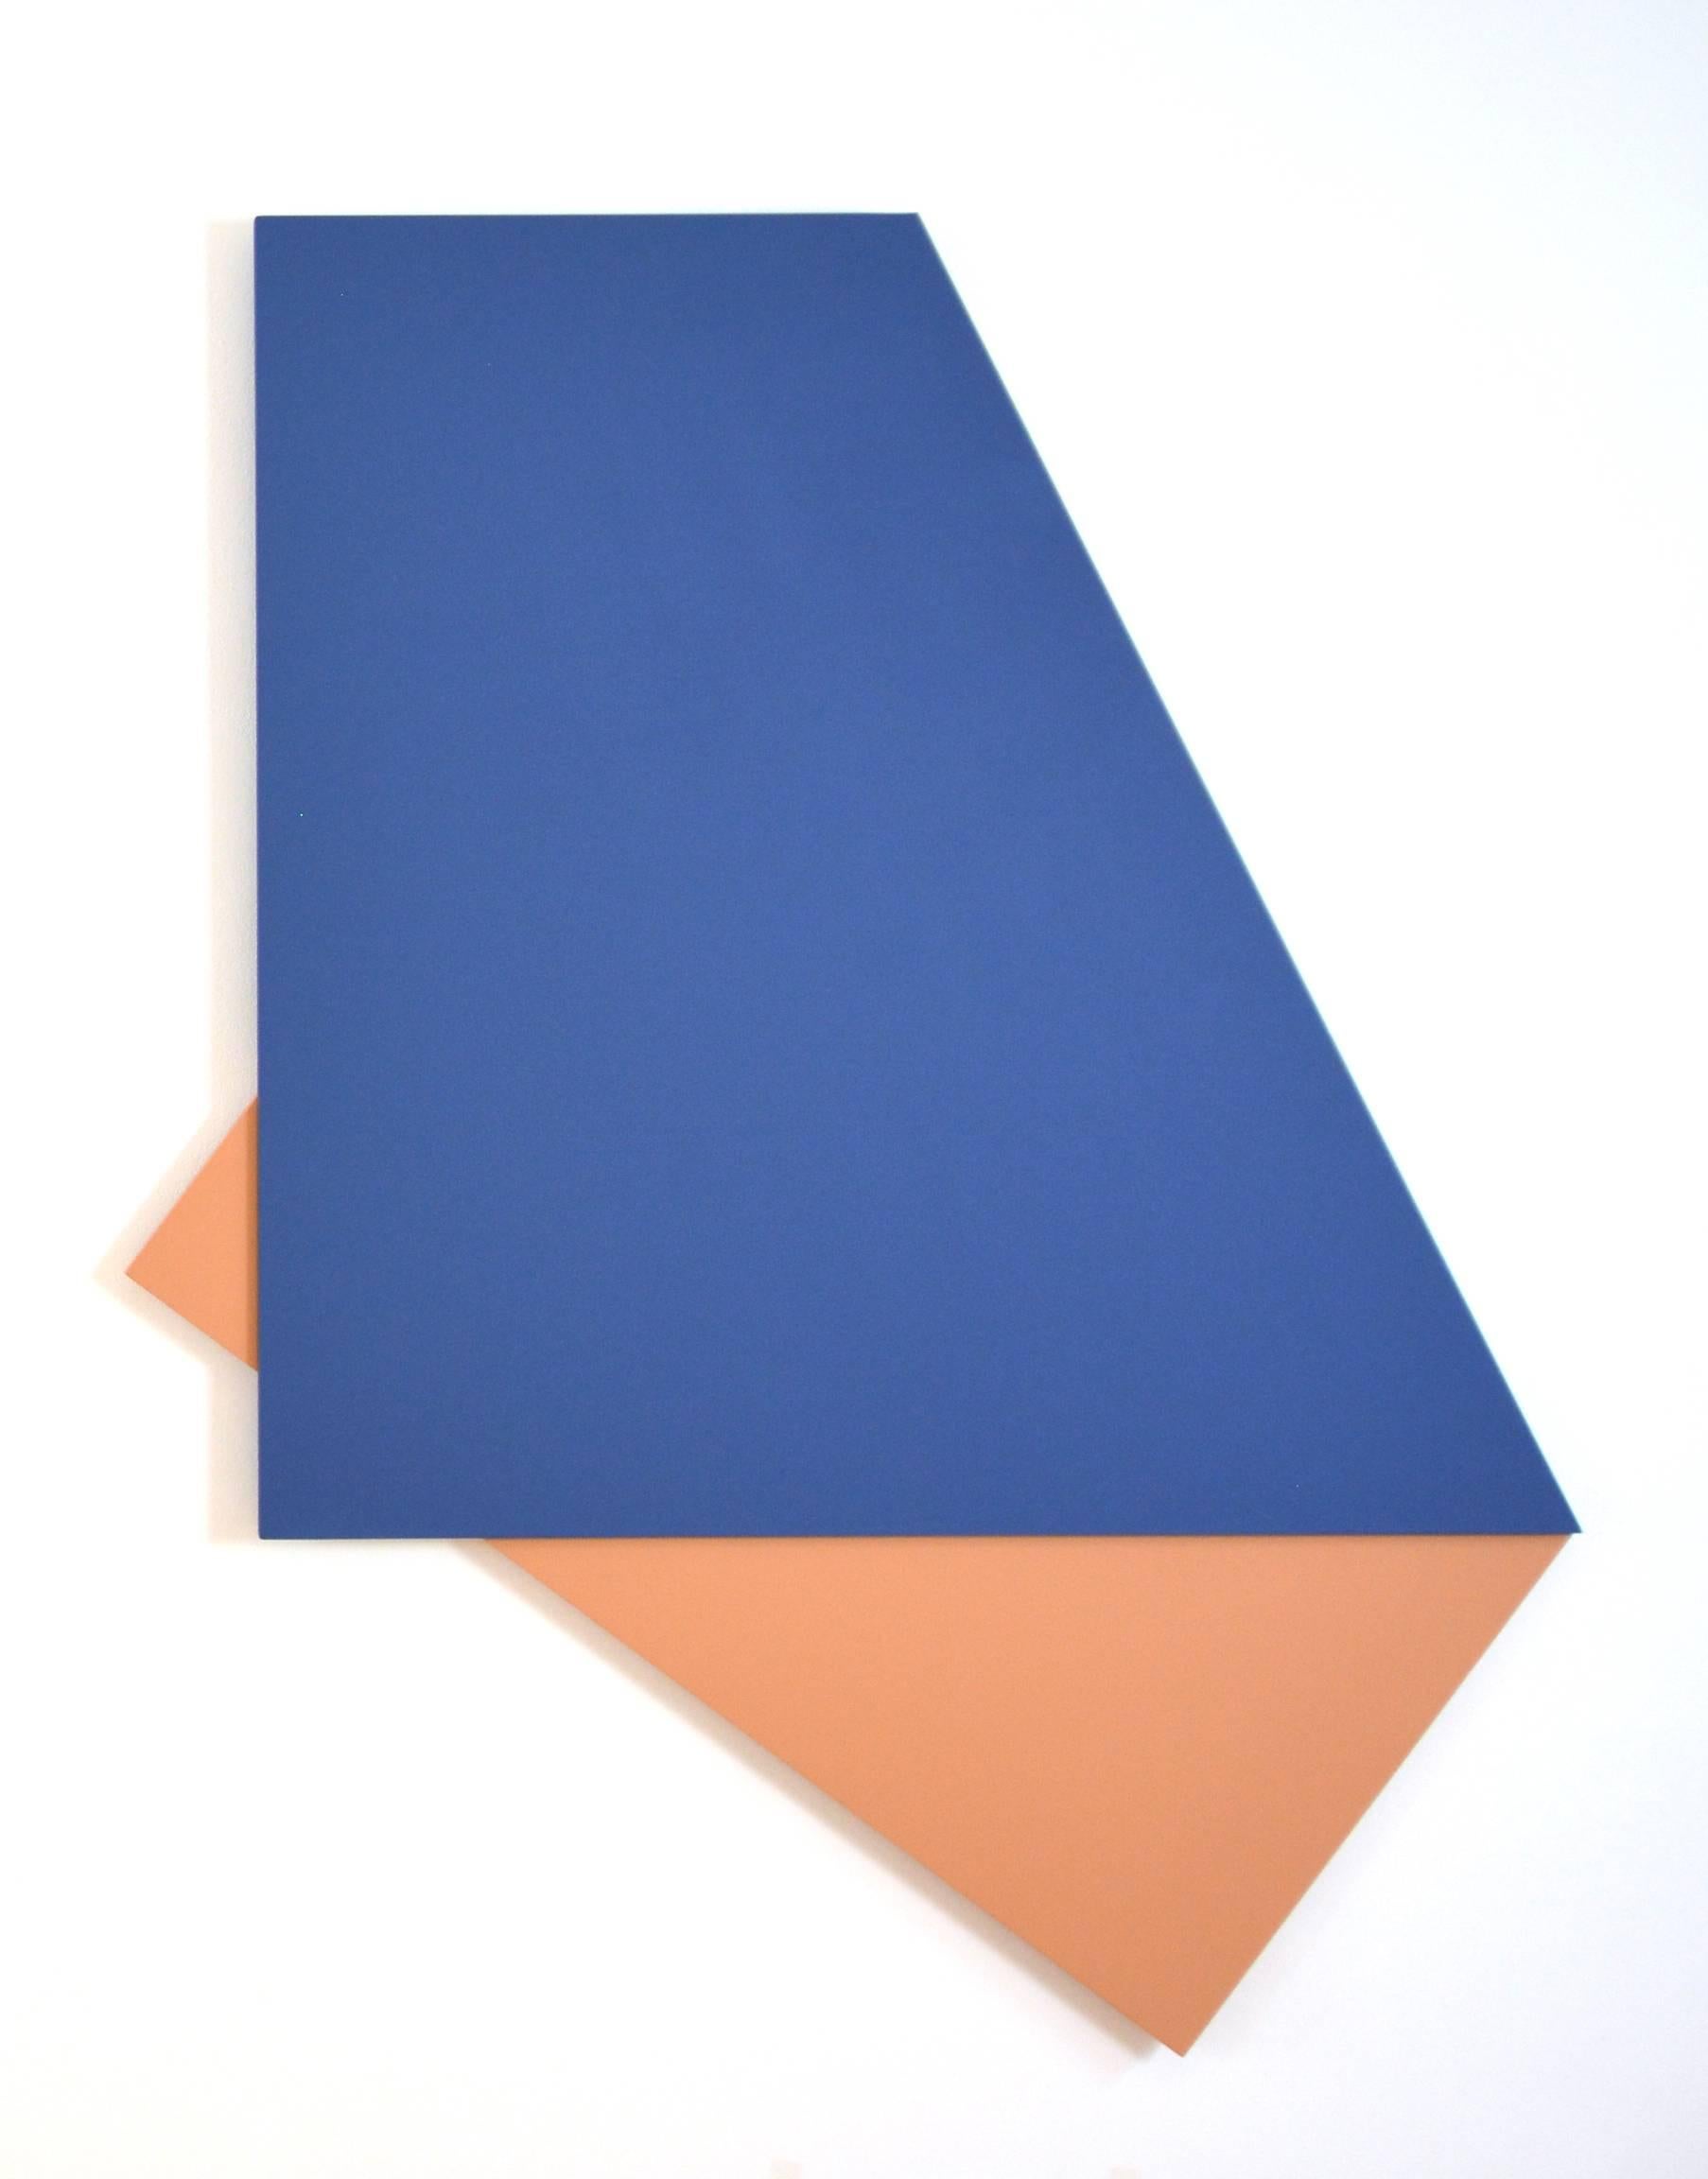 Laura Jane Scott Abstract Painting - Fold: Minimal hard edge abstract painting in blue and apricot